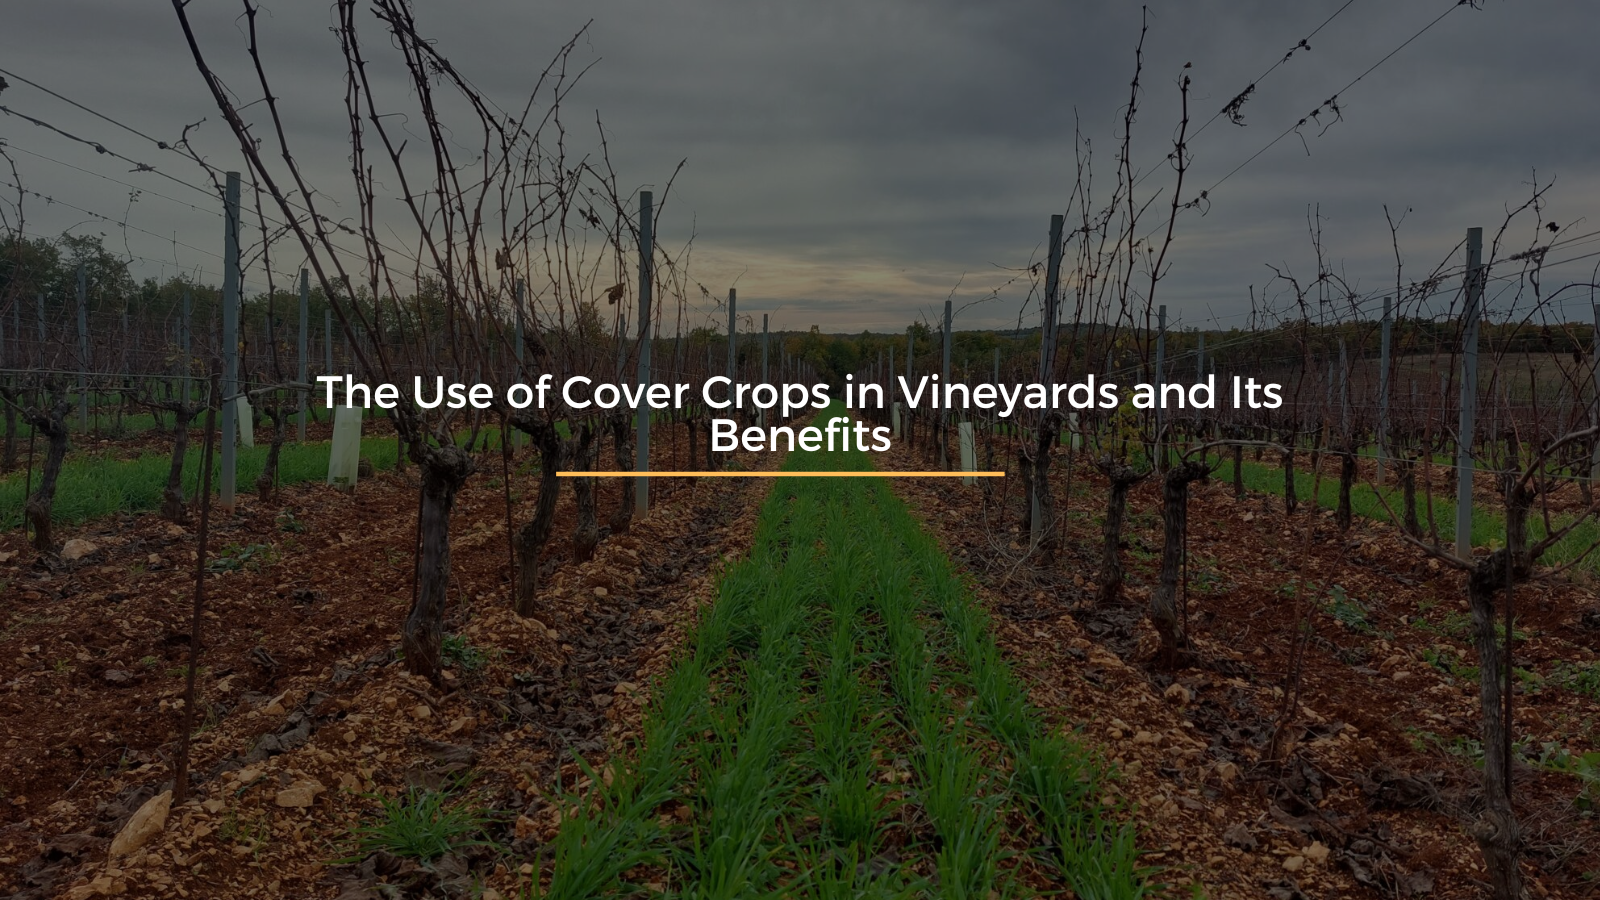 The Use of Cover Crops in Vineyards and Its Benefits